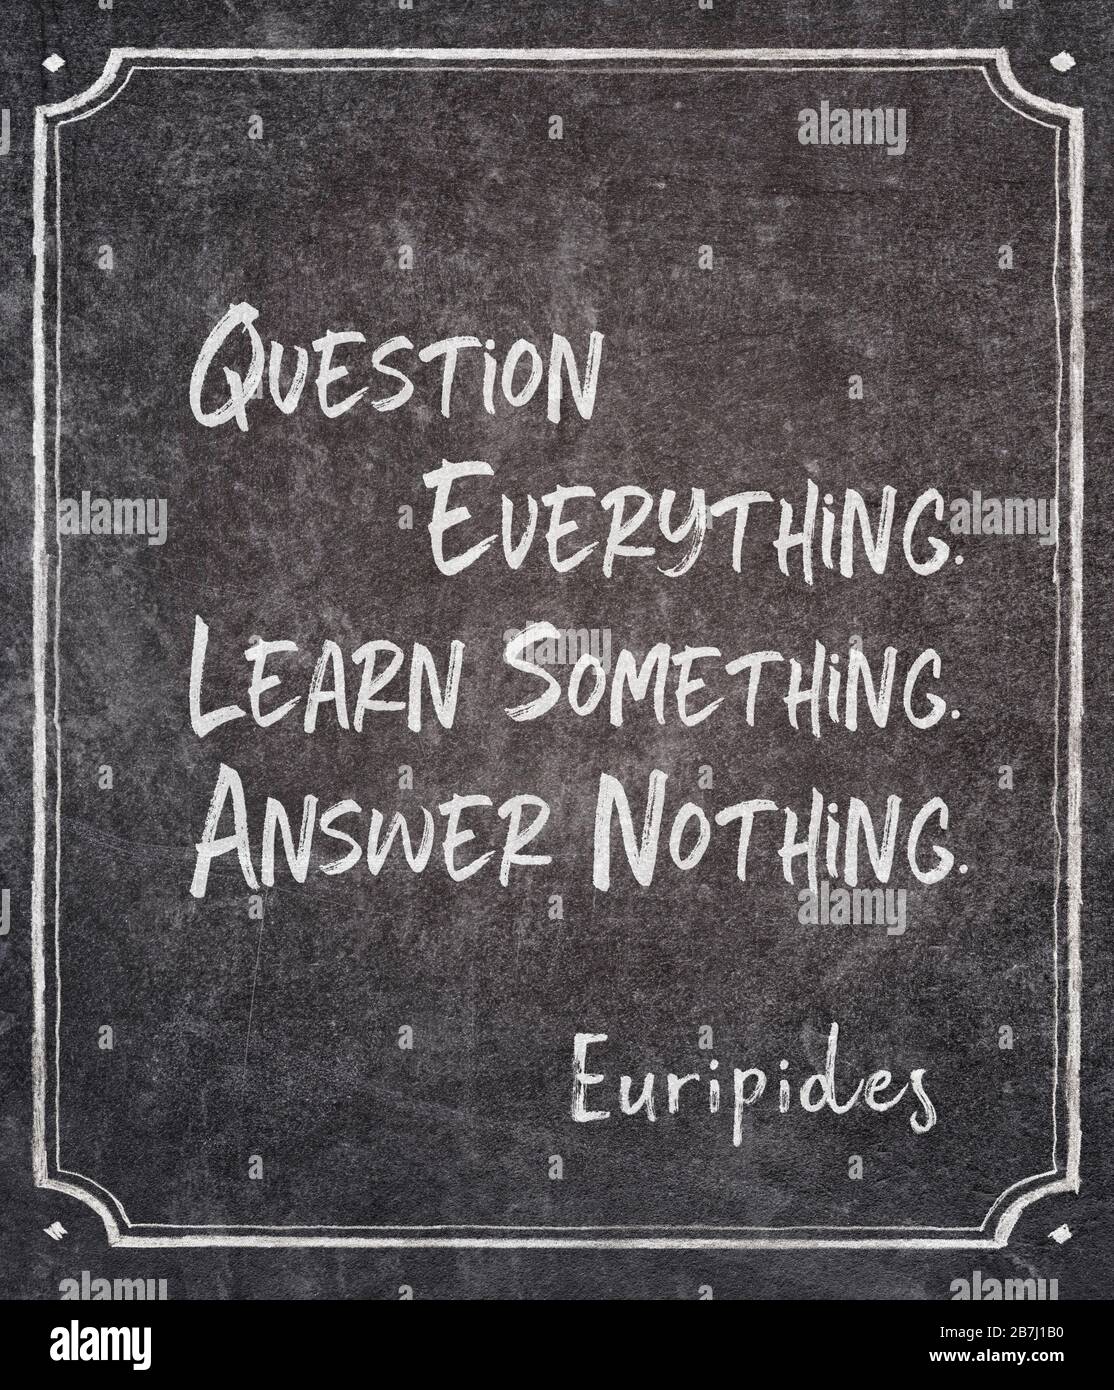 Question everything. Learn something. Answer nothing - ancient Greek  philosopher Euripides quote written on framed chalkboard Stock Photo - Alamy